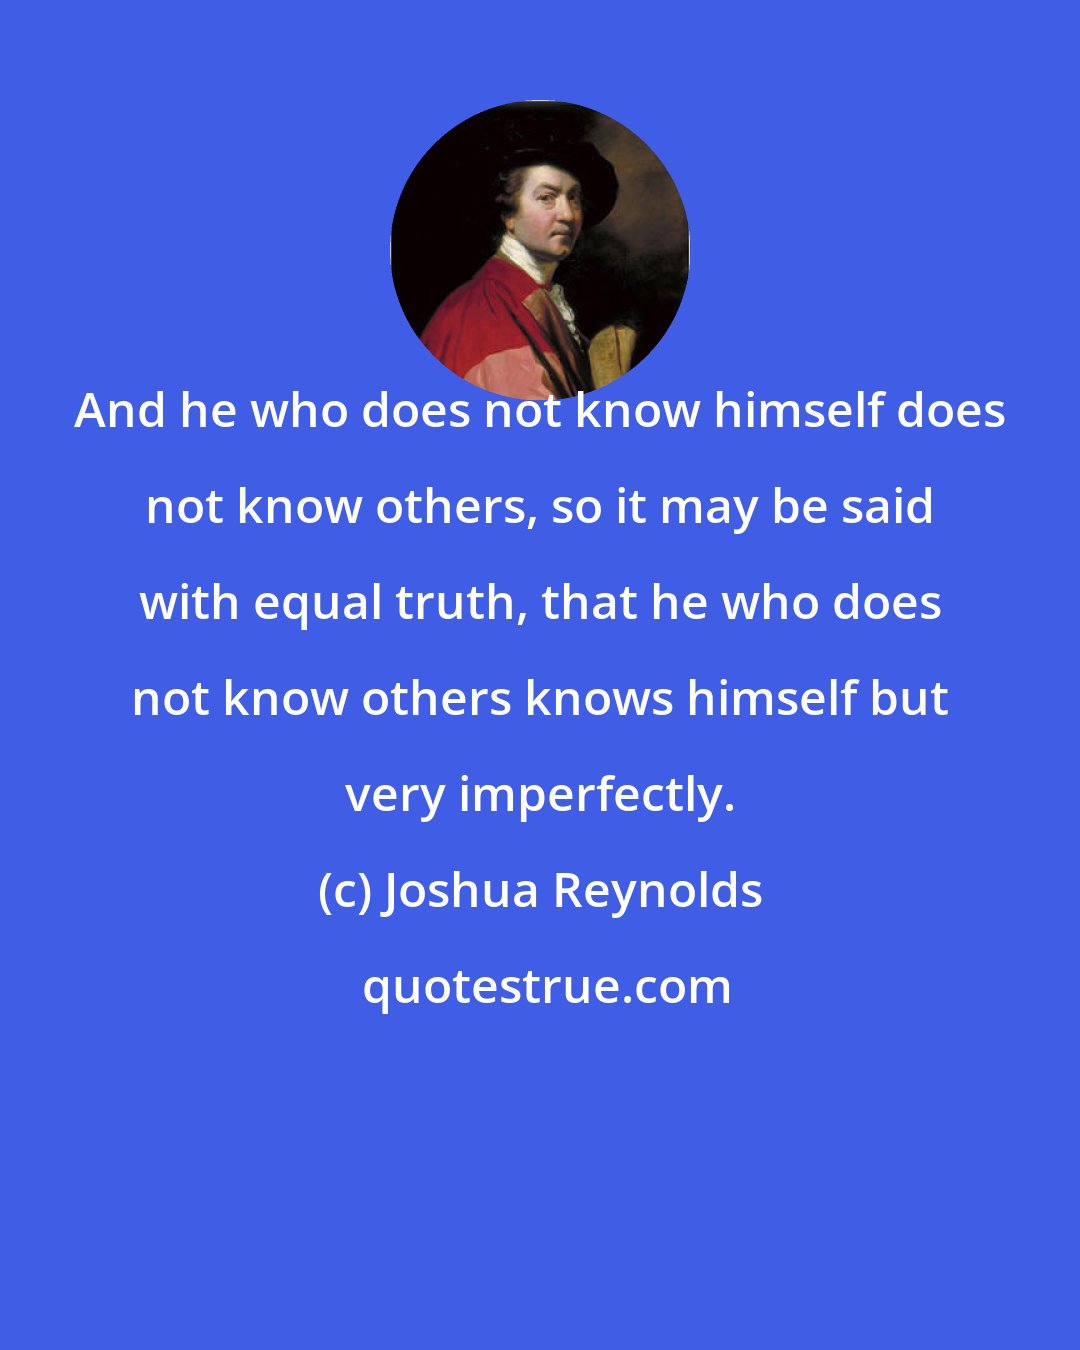 Joshua Reynolds: And he who does not know himself does not know others, so it may be said with equal truth, that he who does not know others knows himself but very imperfectly.